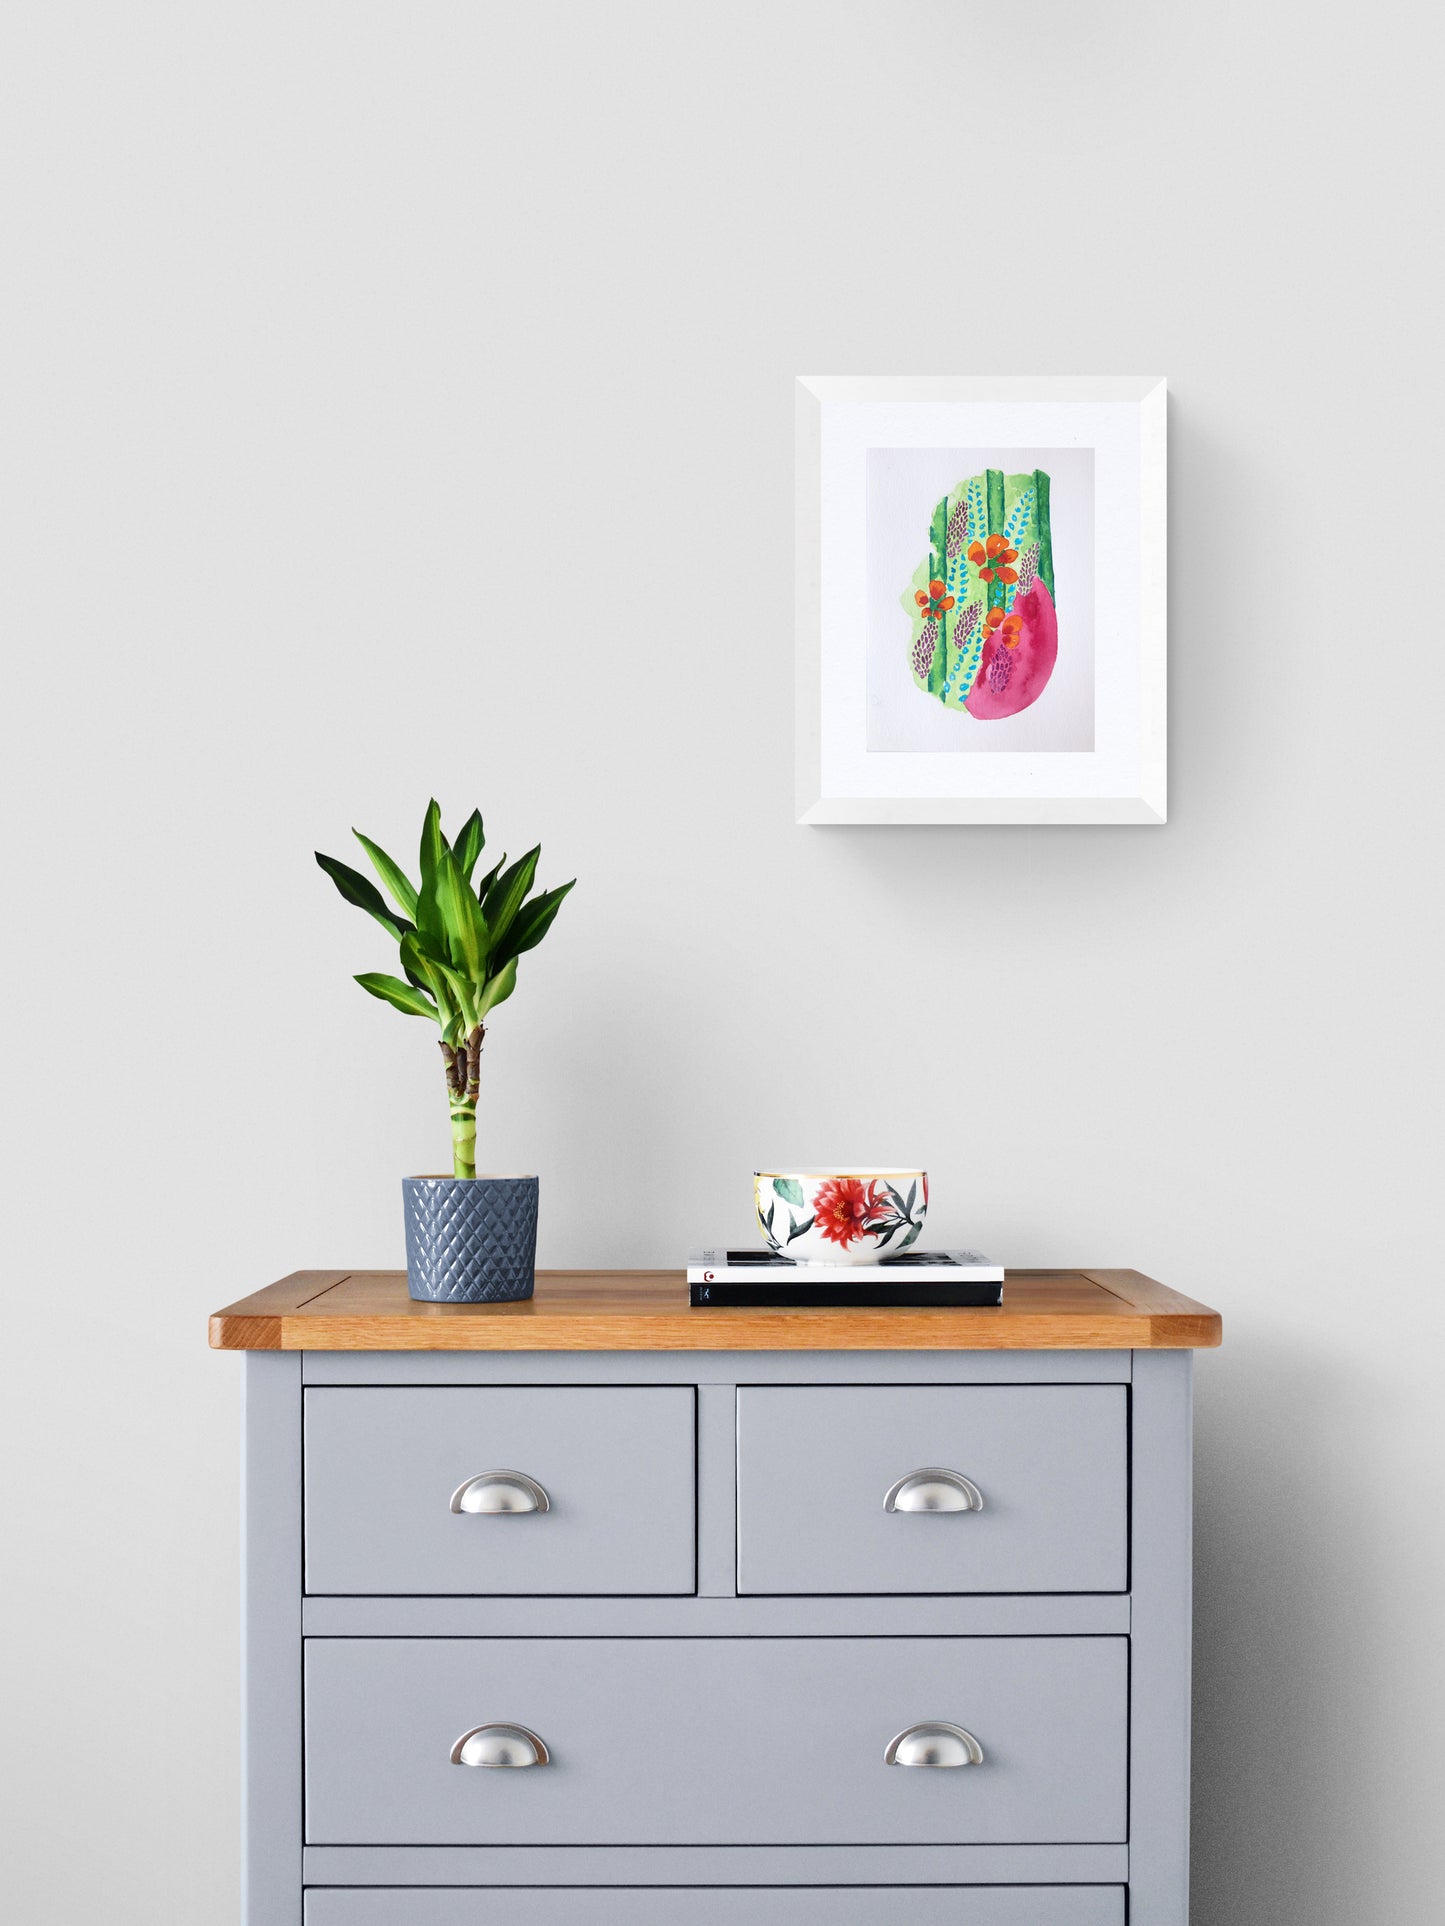 floral immortal original framed watercolour painting displayed on bedroom wall